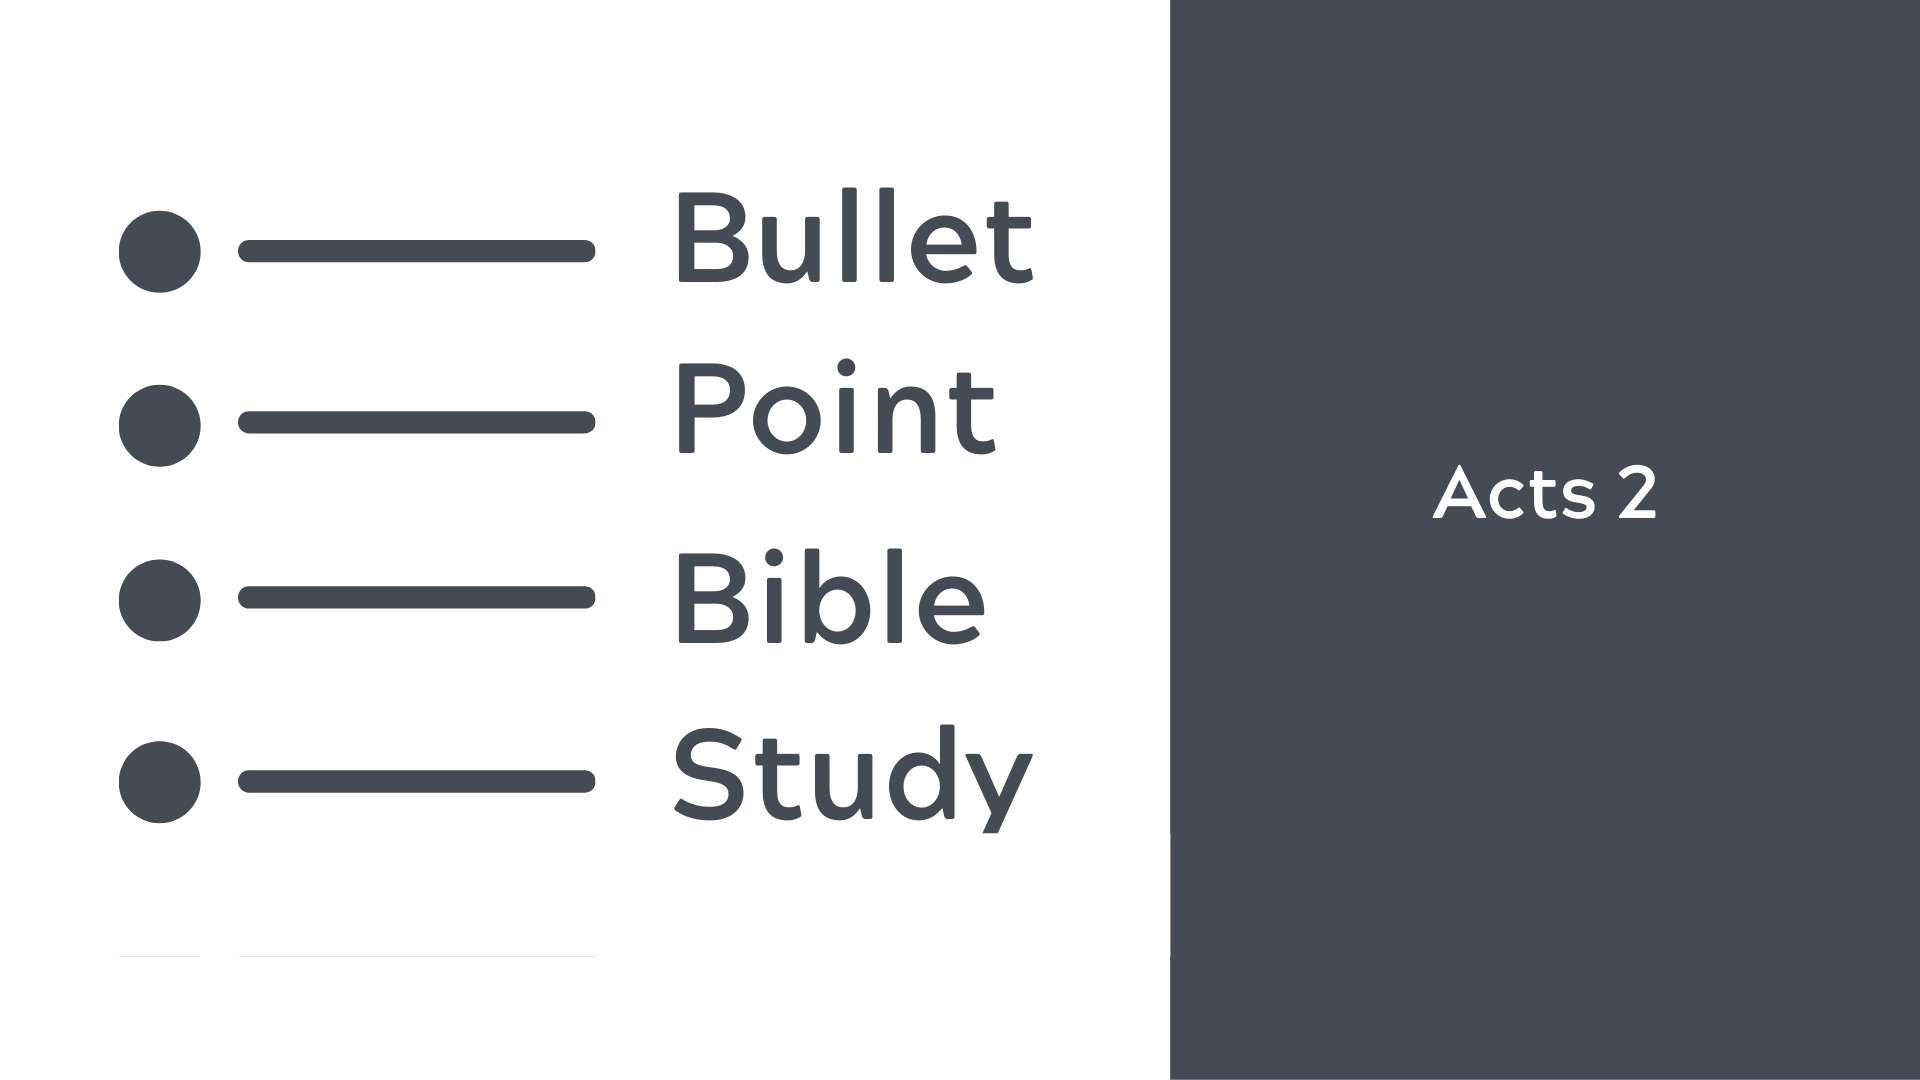 Bullet Point Bible Study - Acts 2